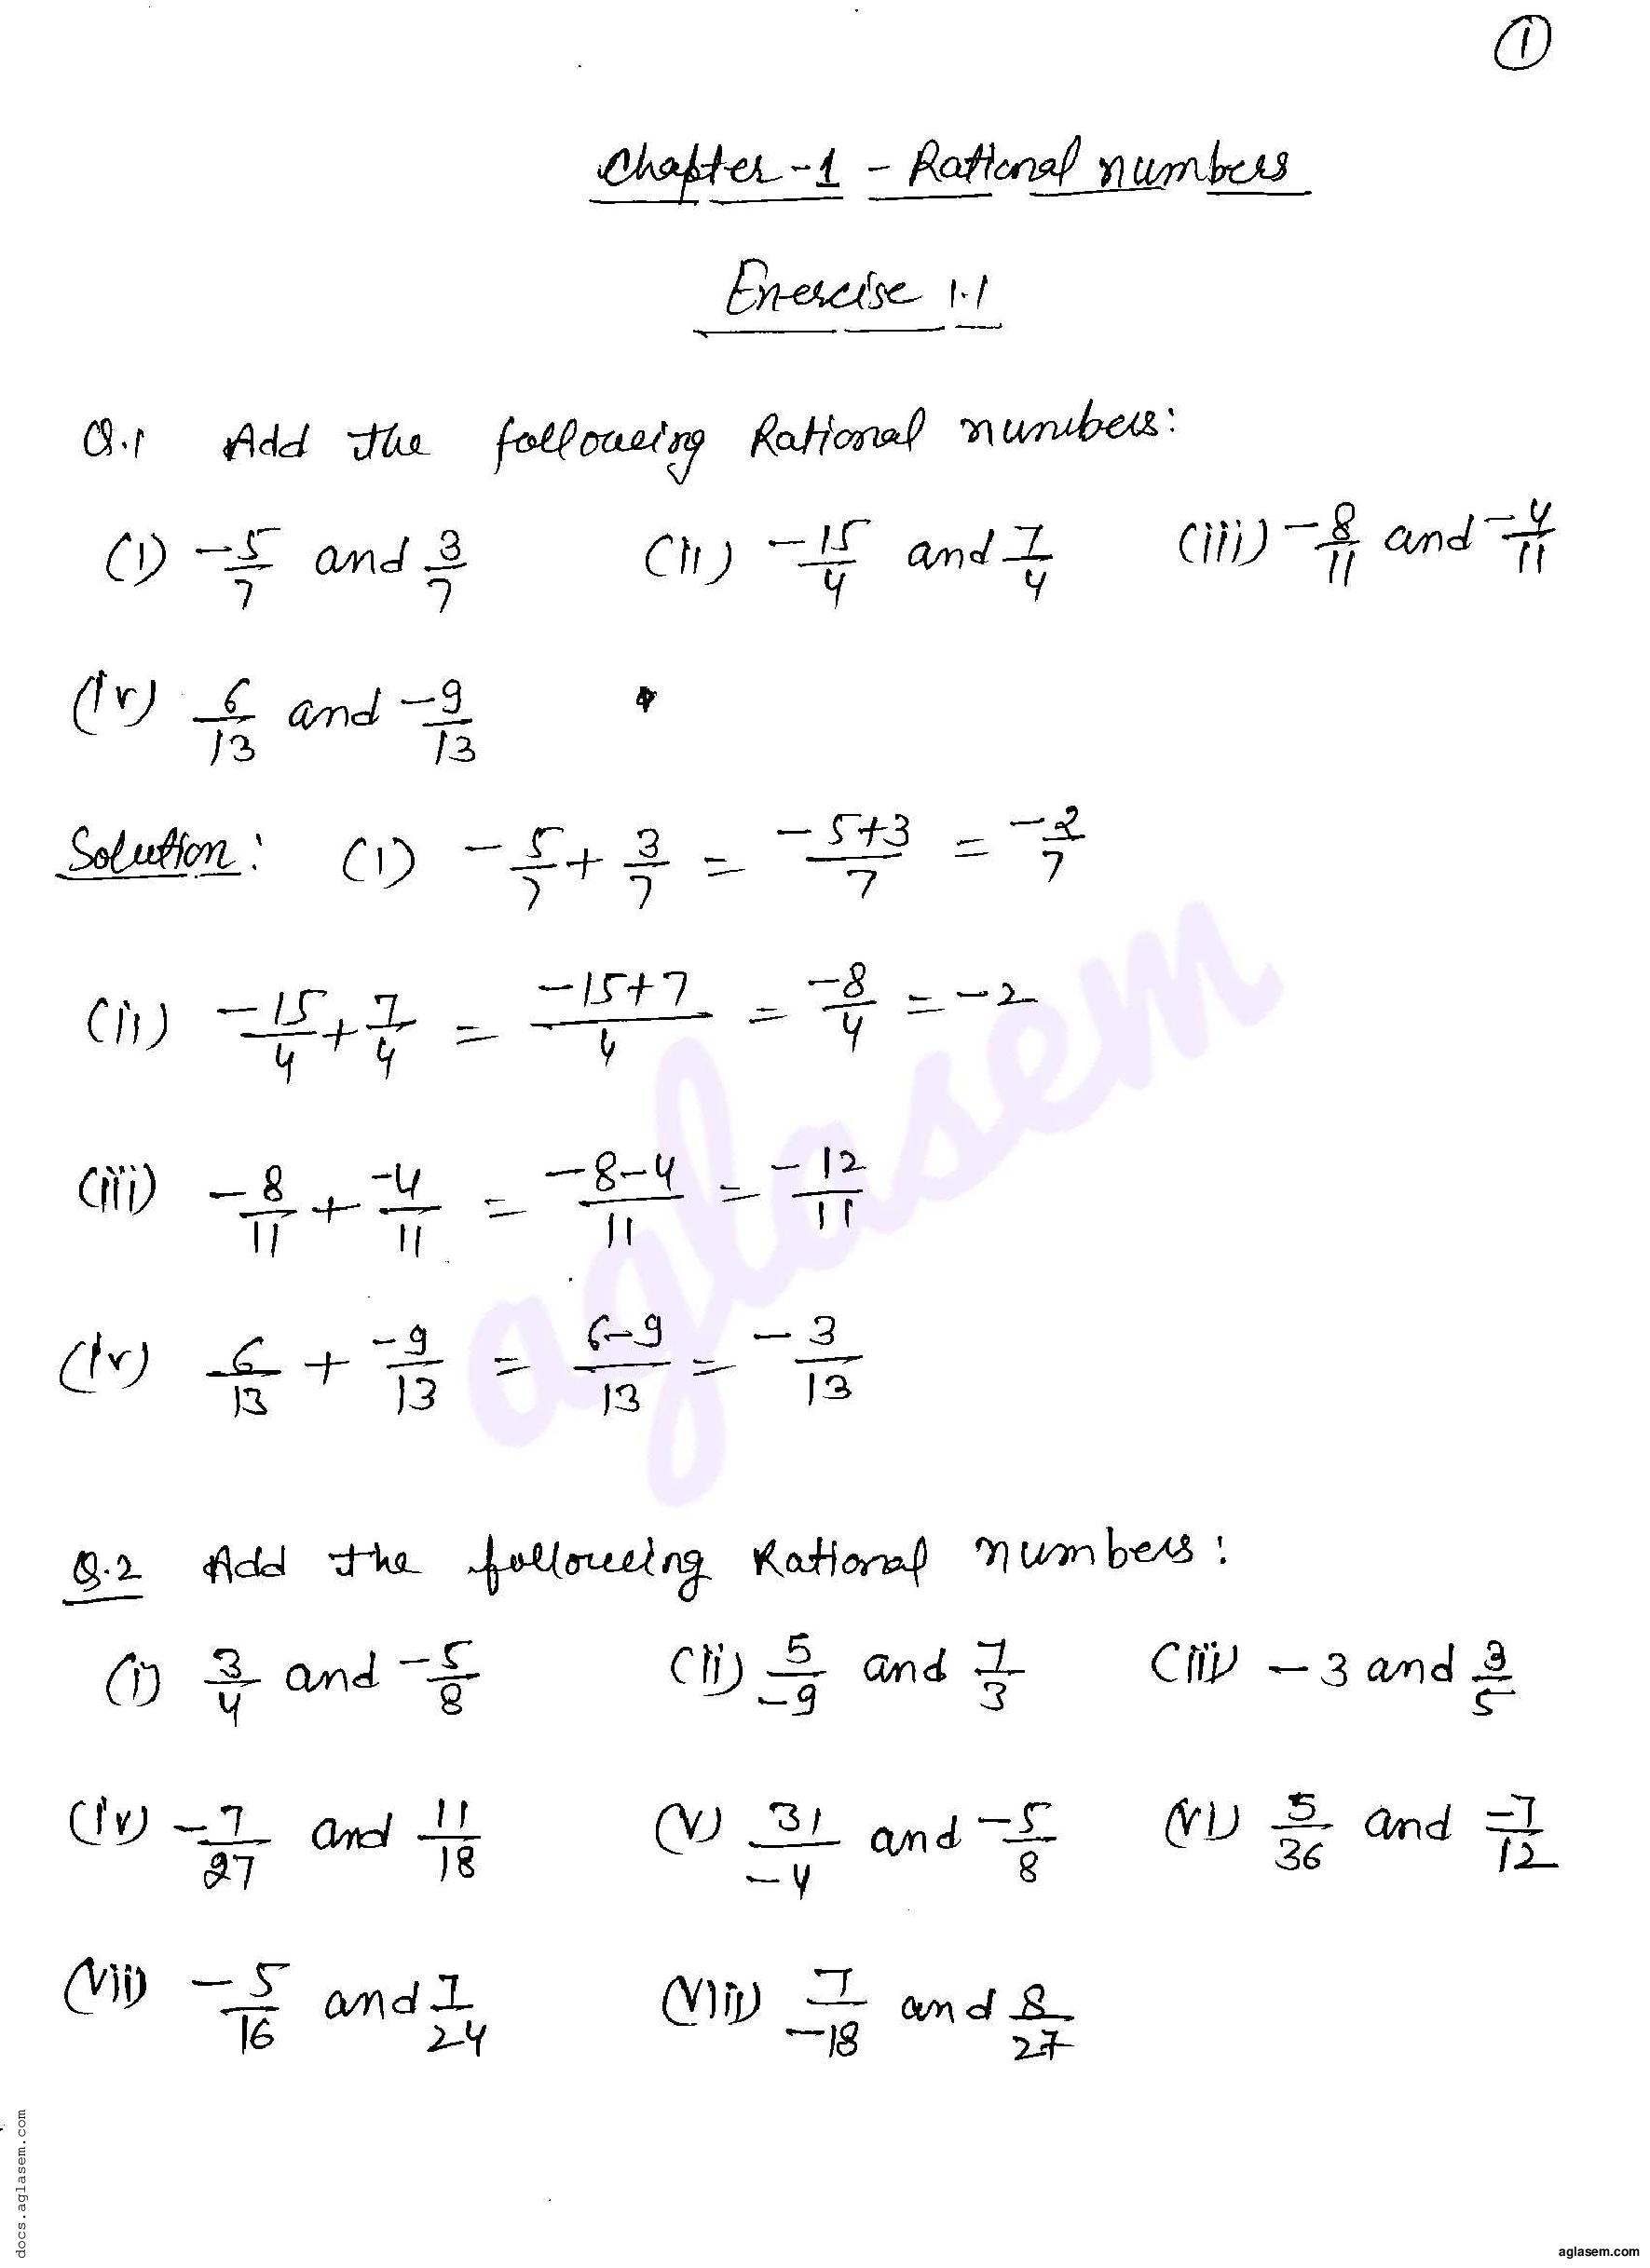 RD Sharma Solutions Class 8 Chapter 1 Rational Numbers Exercise 1.1 - Page 1